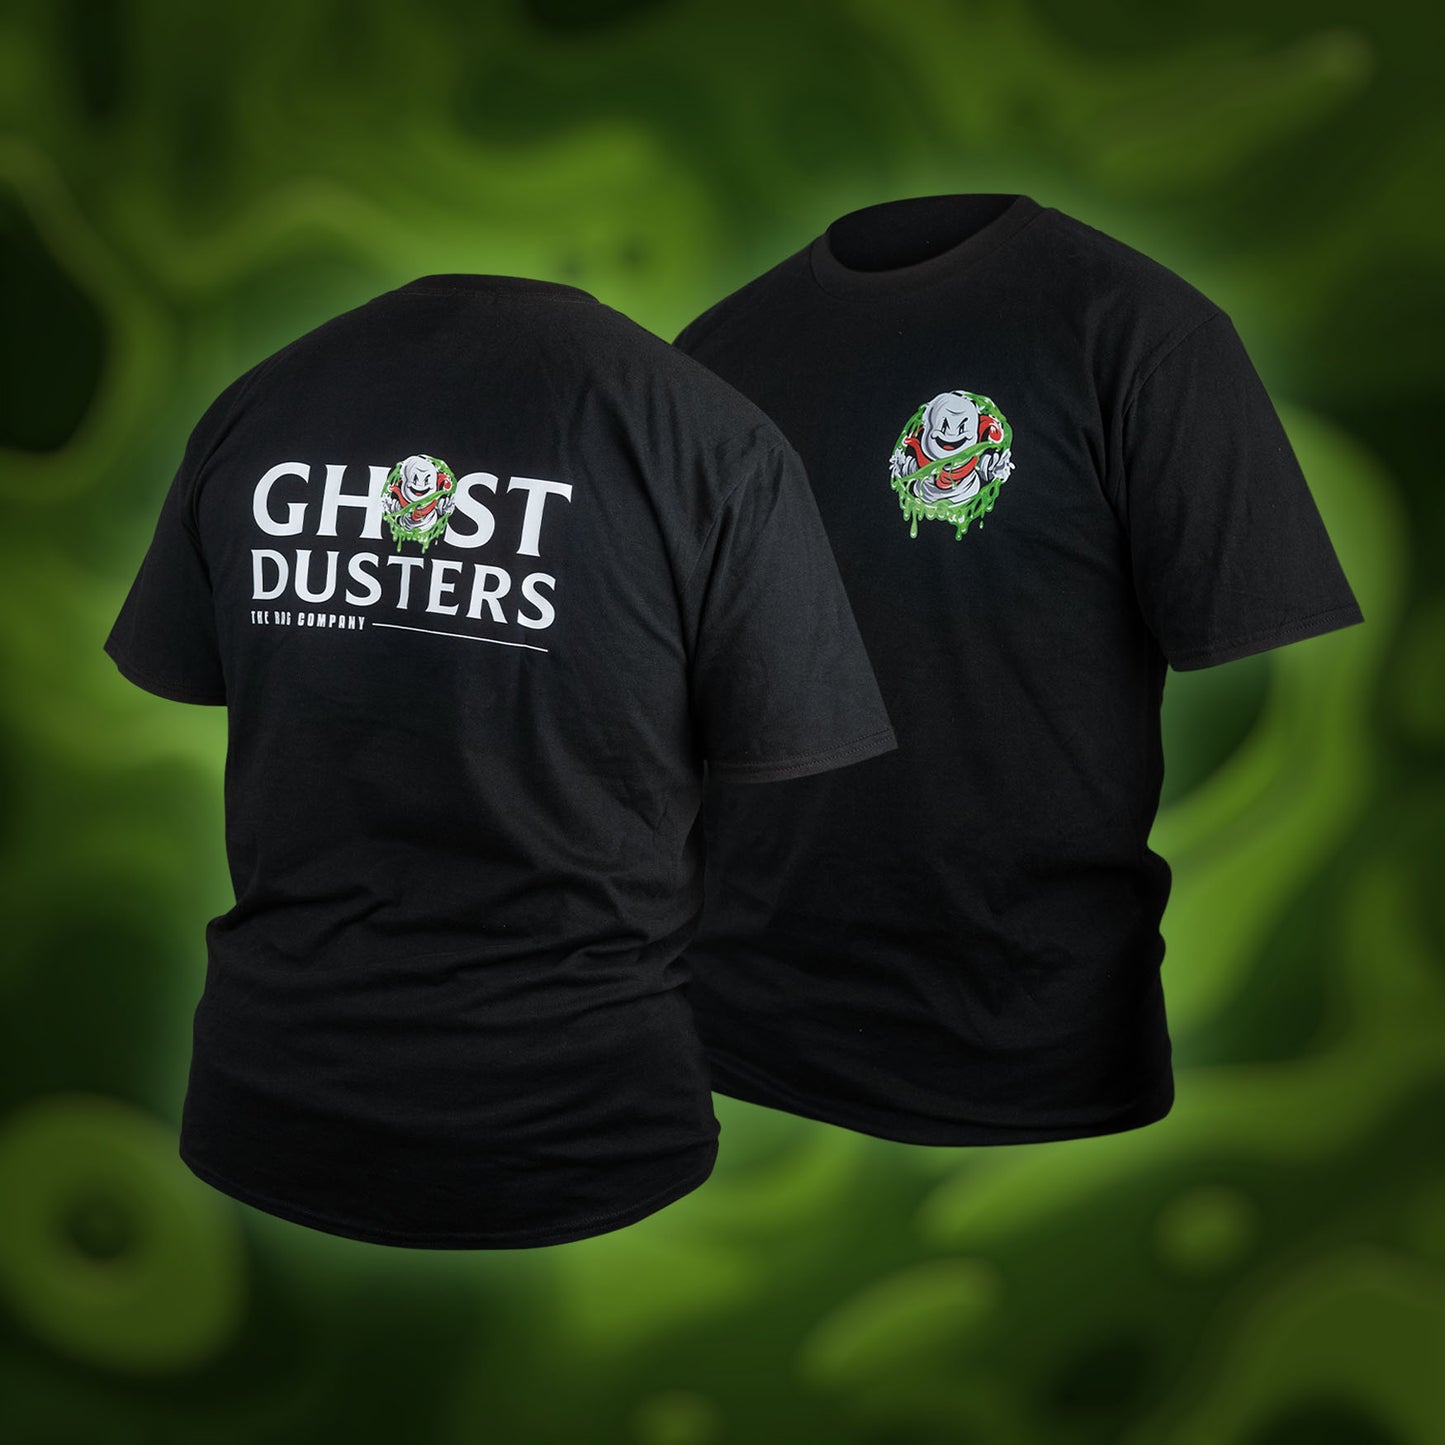 GHOST DUSTERS T-SHIRT